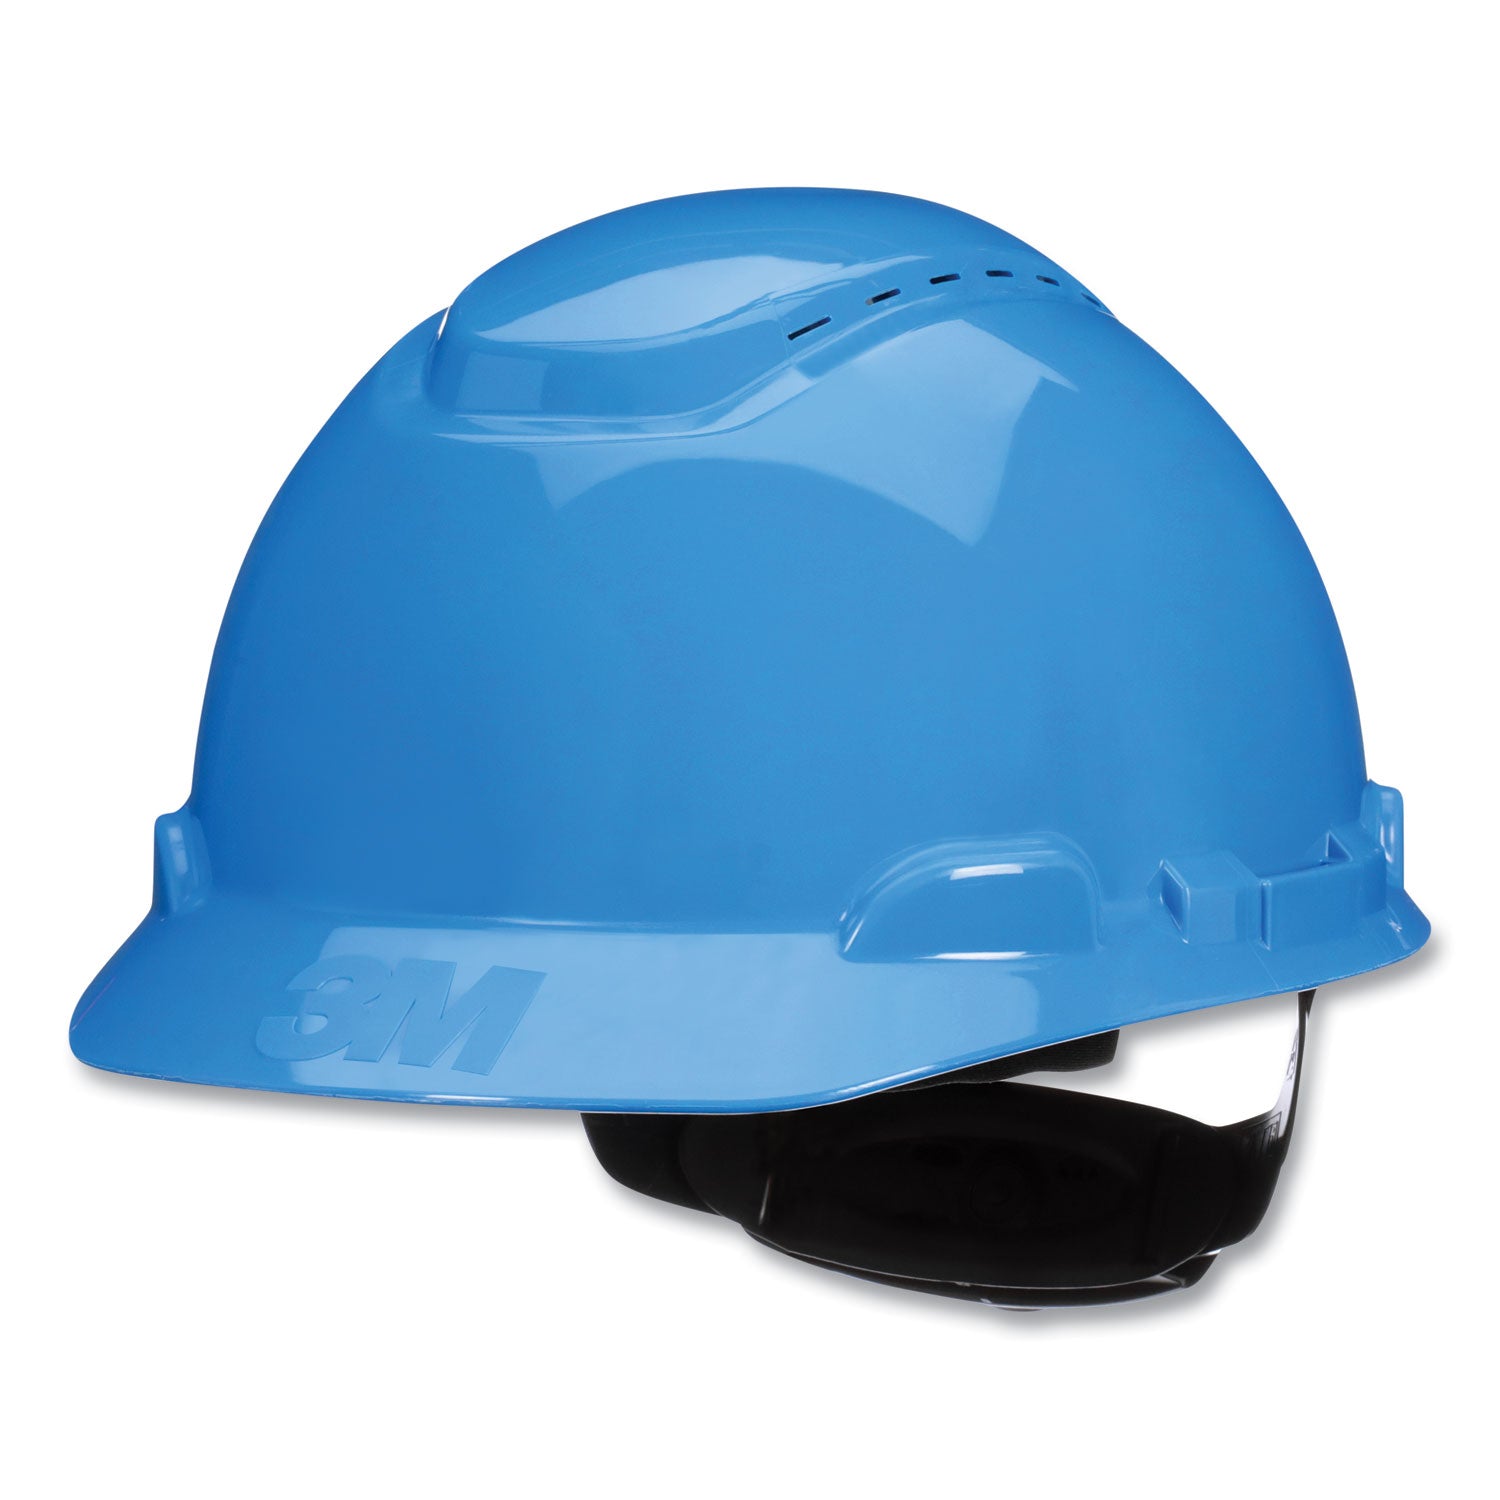 securefit-h-series-hard-hats-h-700-vented-cap-with-uv-indicator-4-point-pressure-diffusion-ratchet-suspension-blue_mmmh703sfvuv - 1